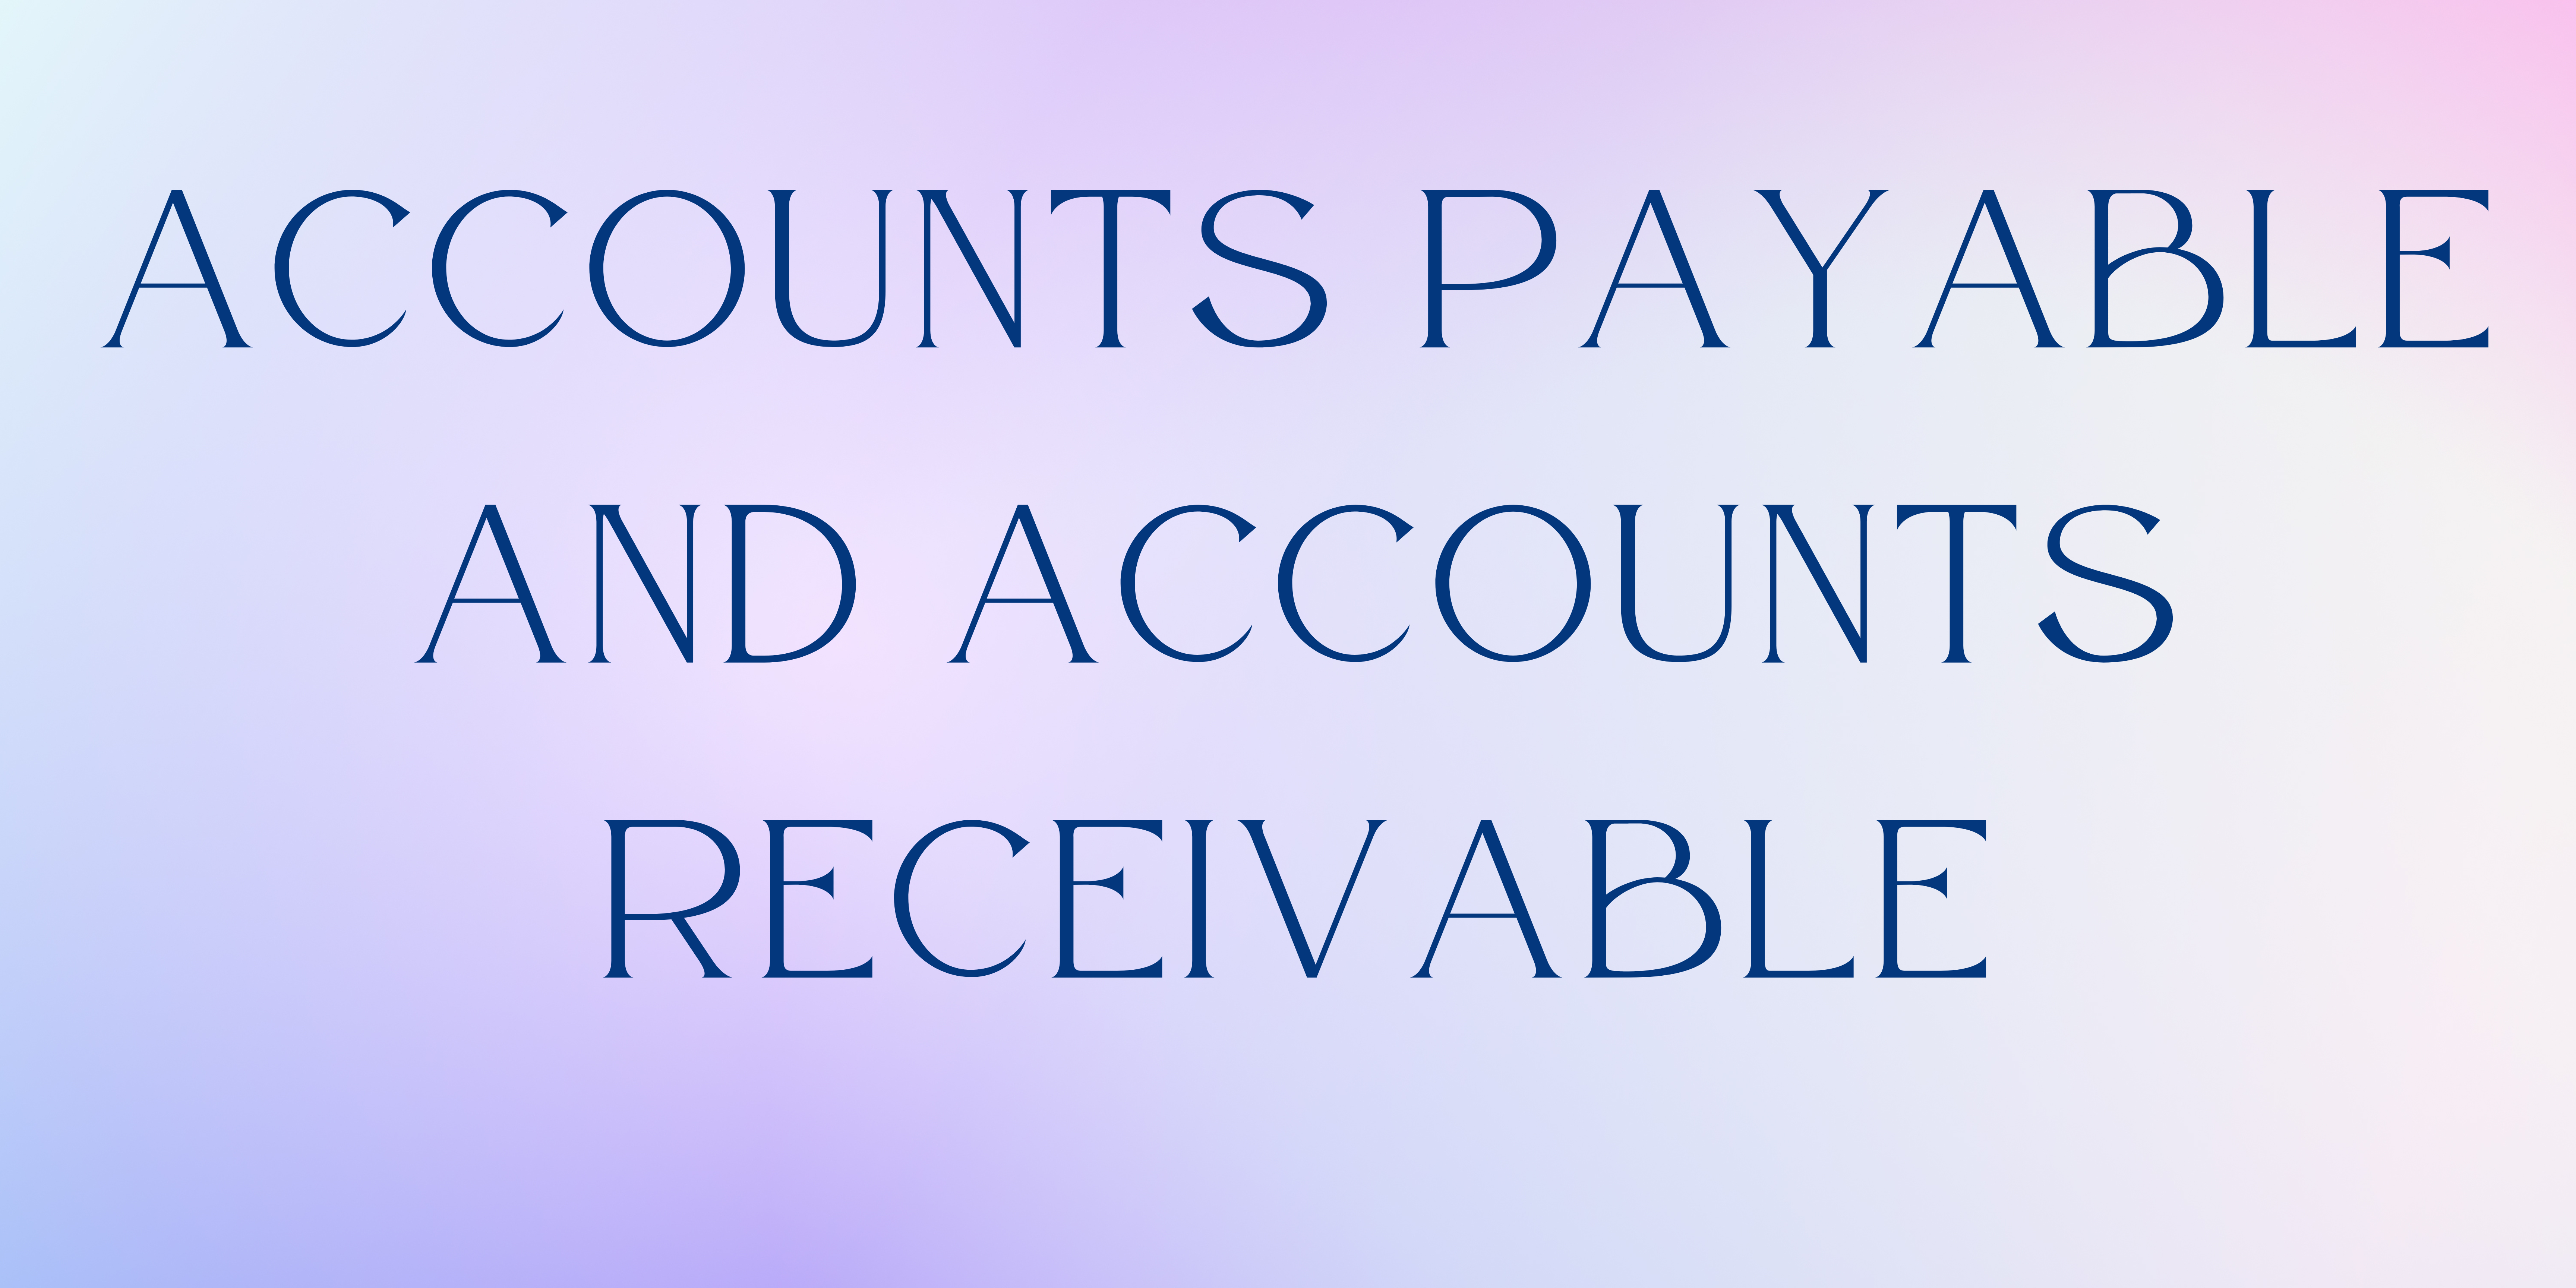 Accounts payable and accounts receivable differences